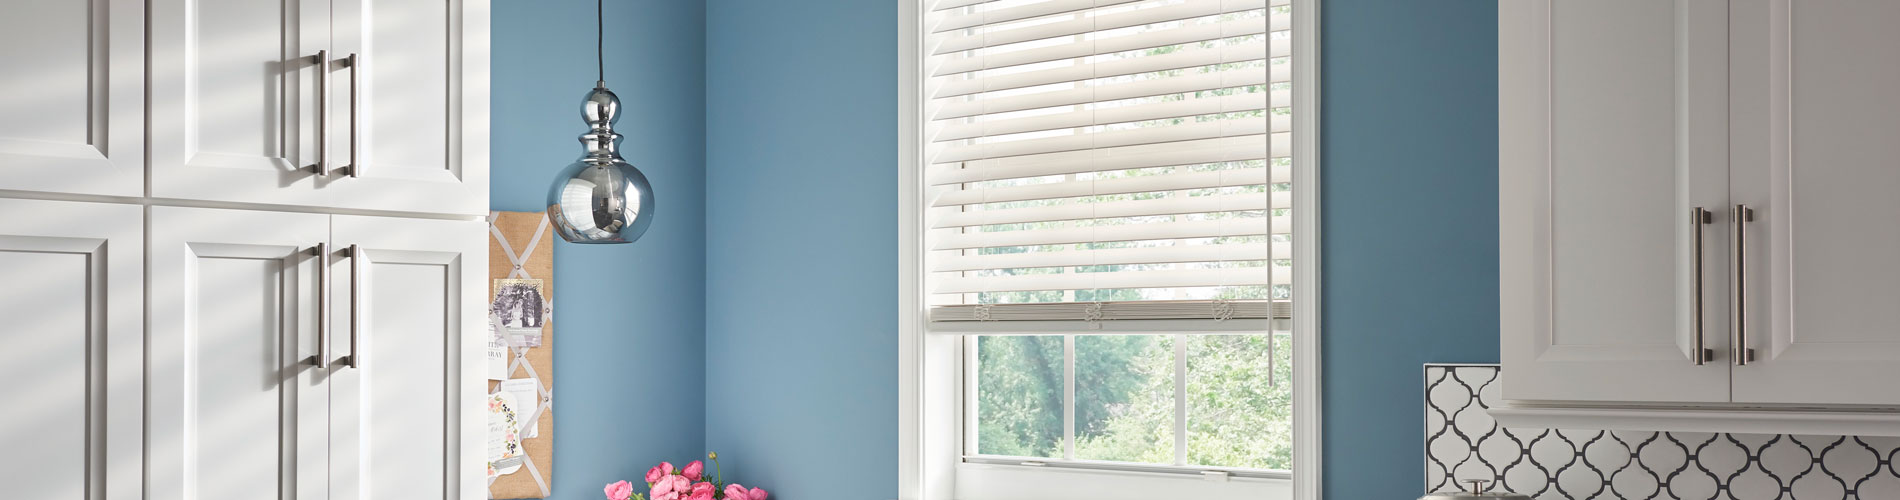 Faux Wood Blinds, Custom Blinds and Installation - Budget Blinds